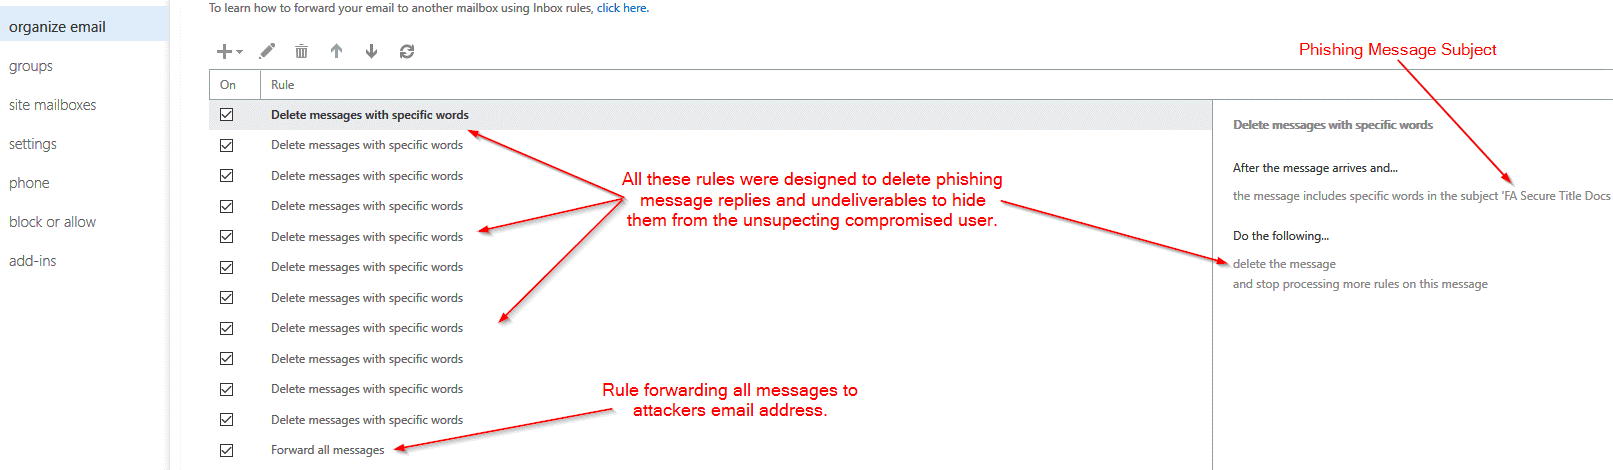 email example